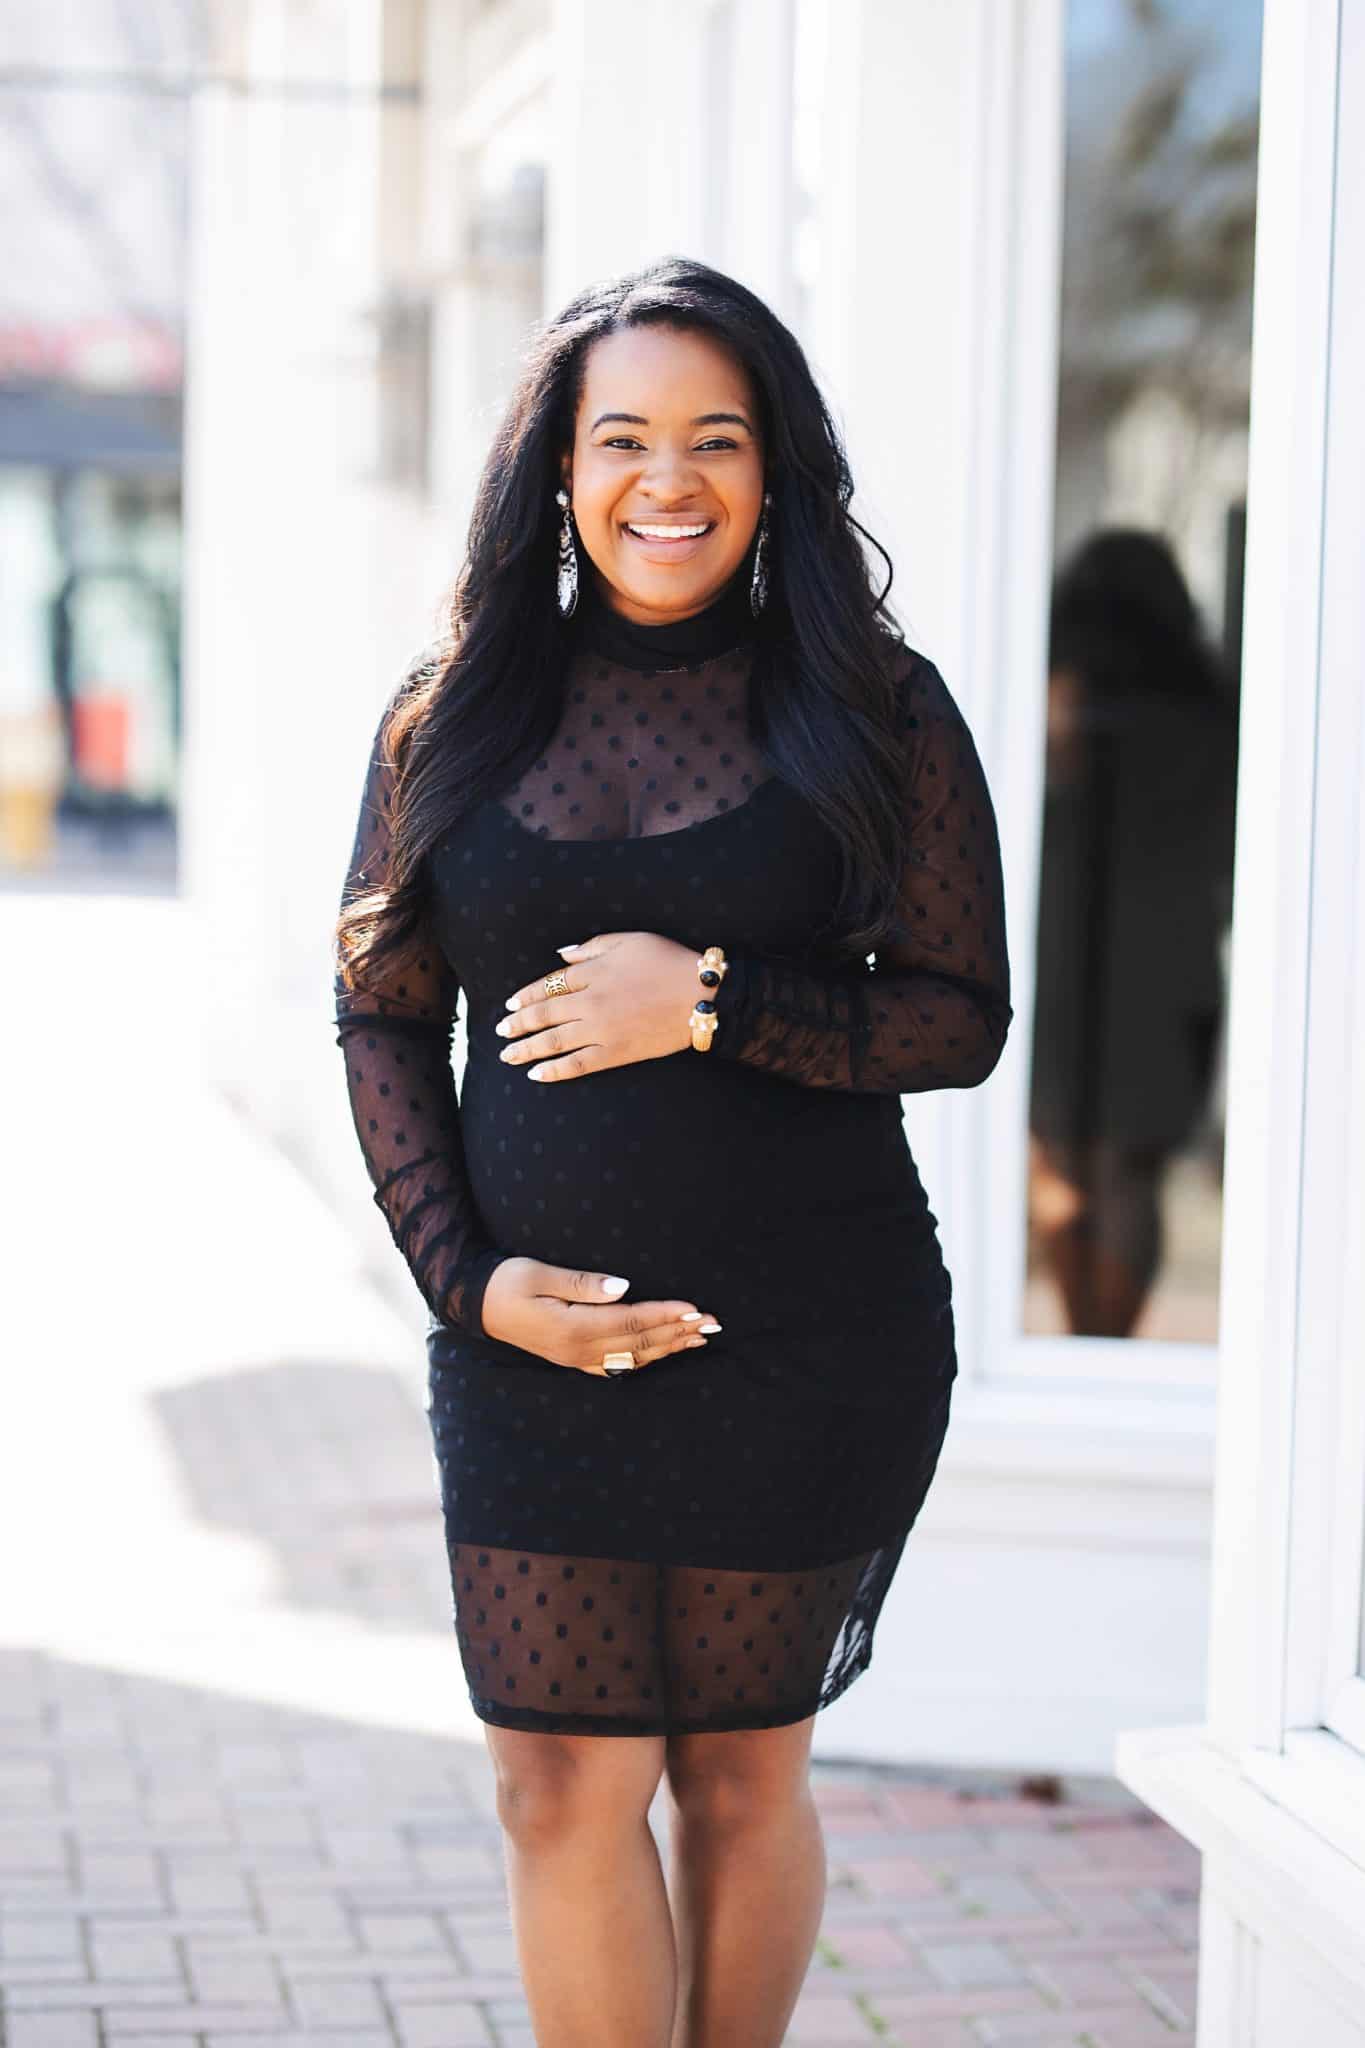 Valentine's Day Dresses in Every Budget by popular Dallas fashion blog, Glamorous Versatility: image of a woman wearing a black mesh polka dot dress and holding her pregnant belly.